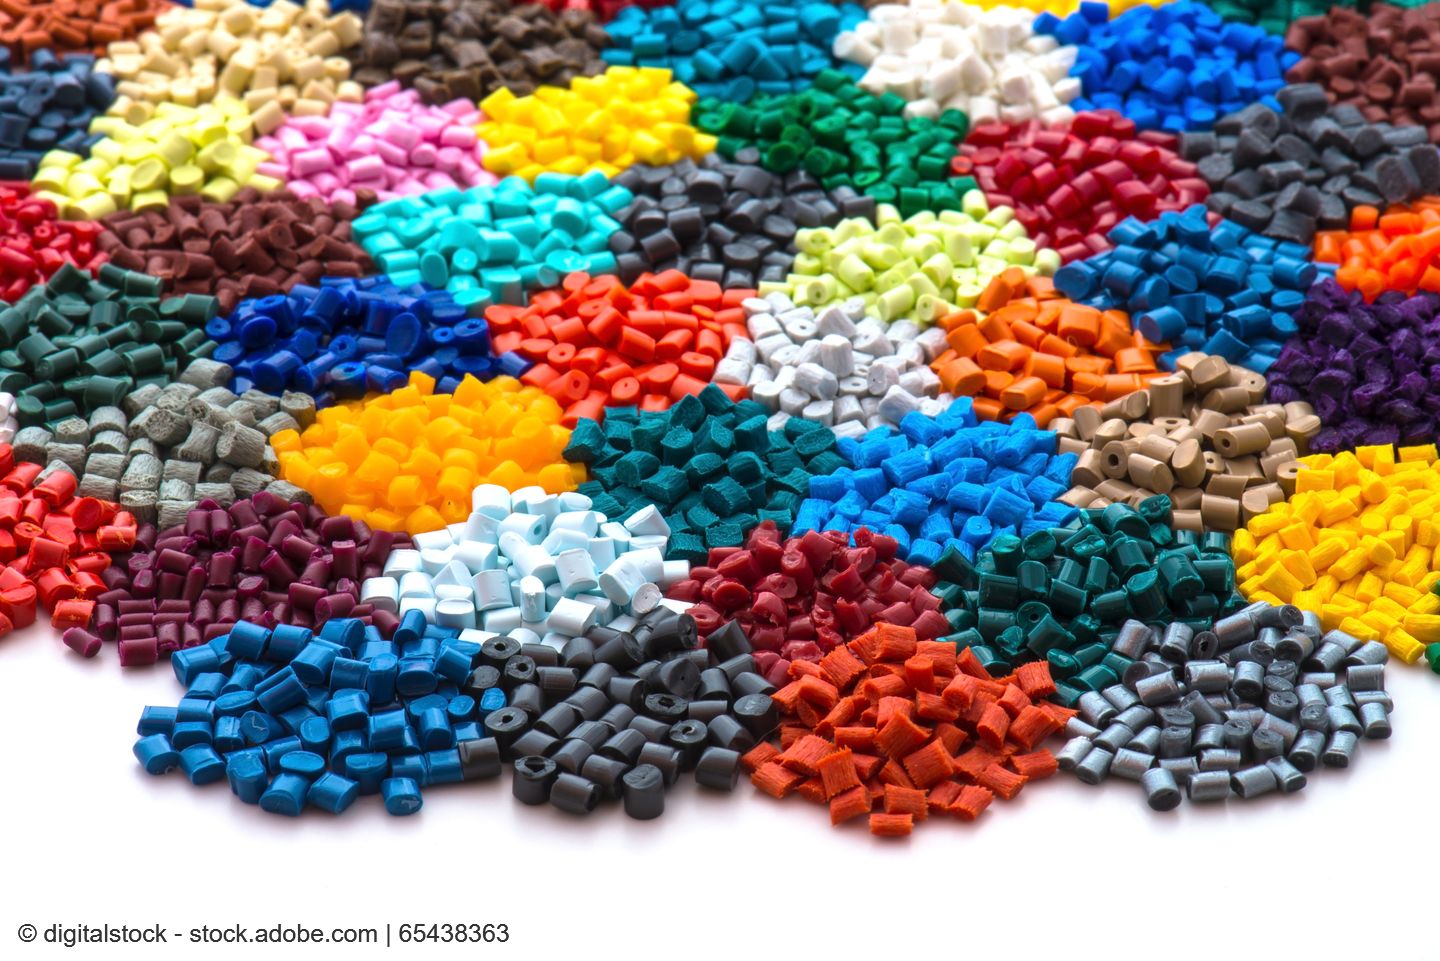 Colorful recycled plastic pellet